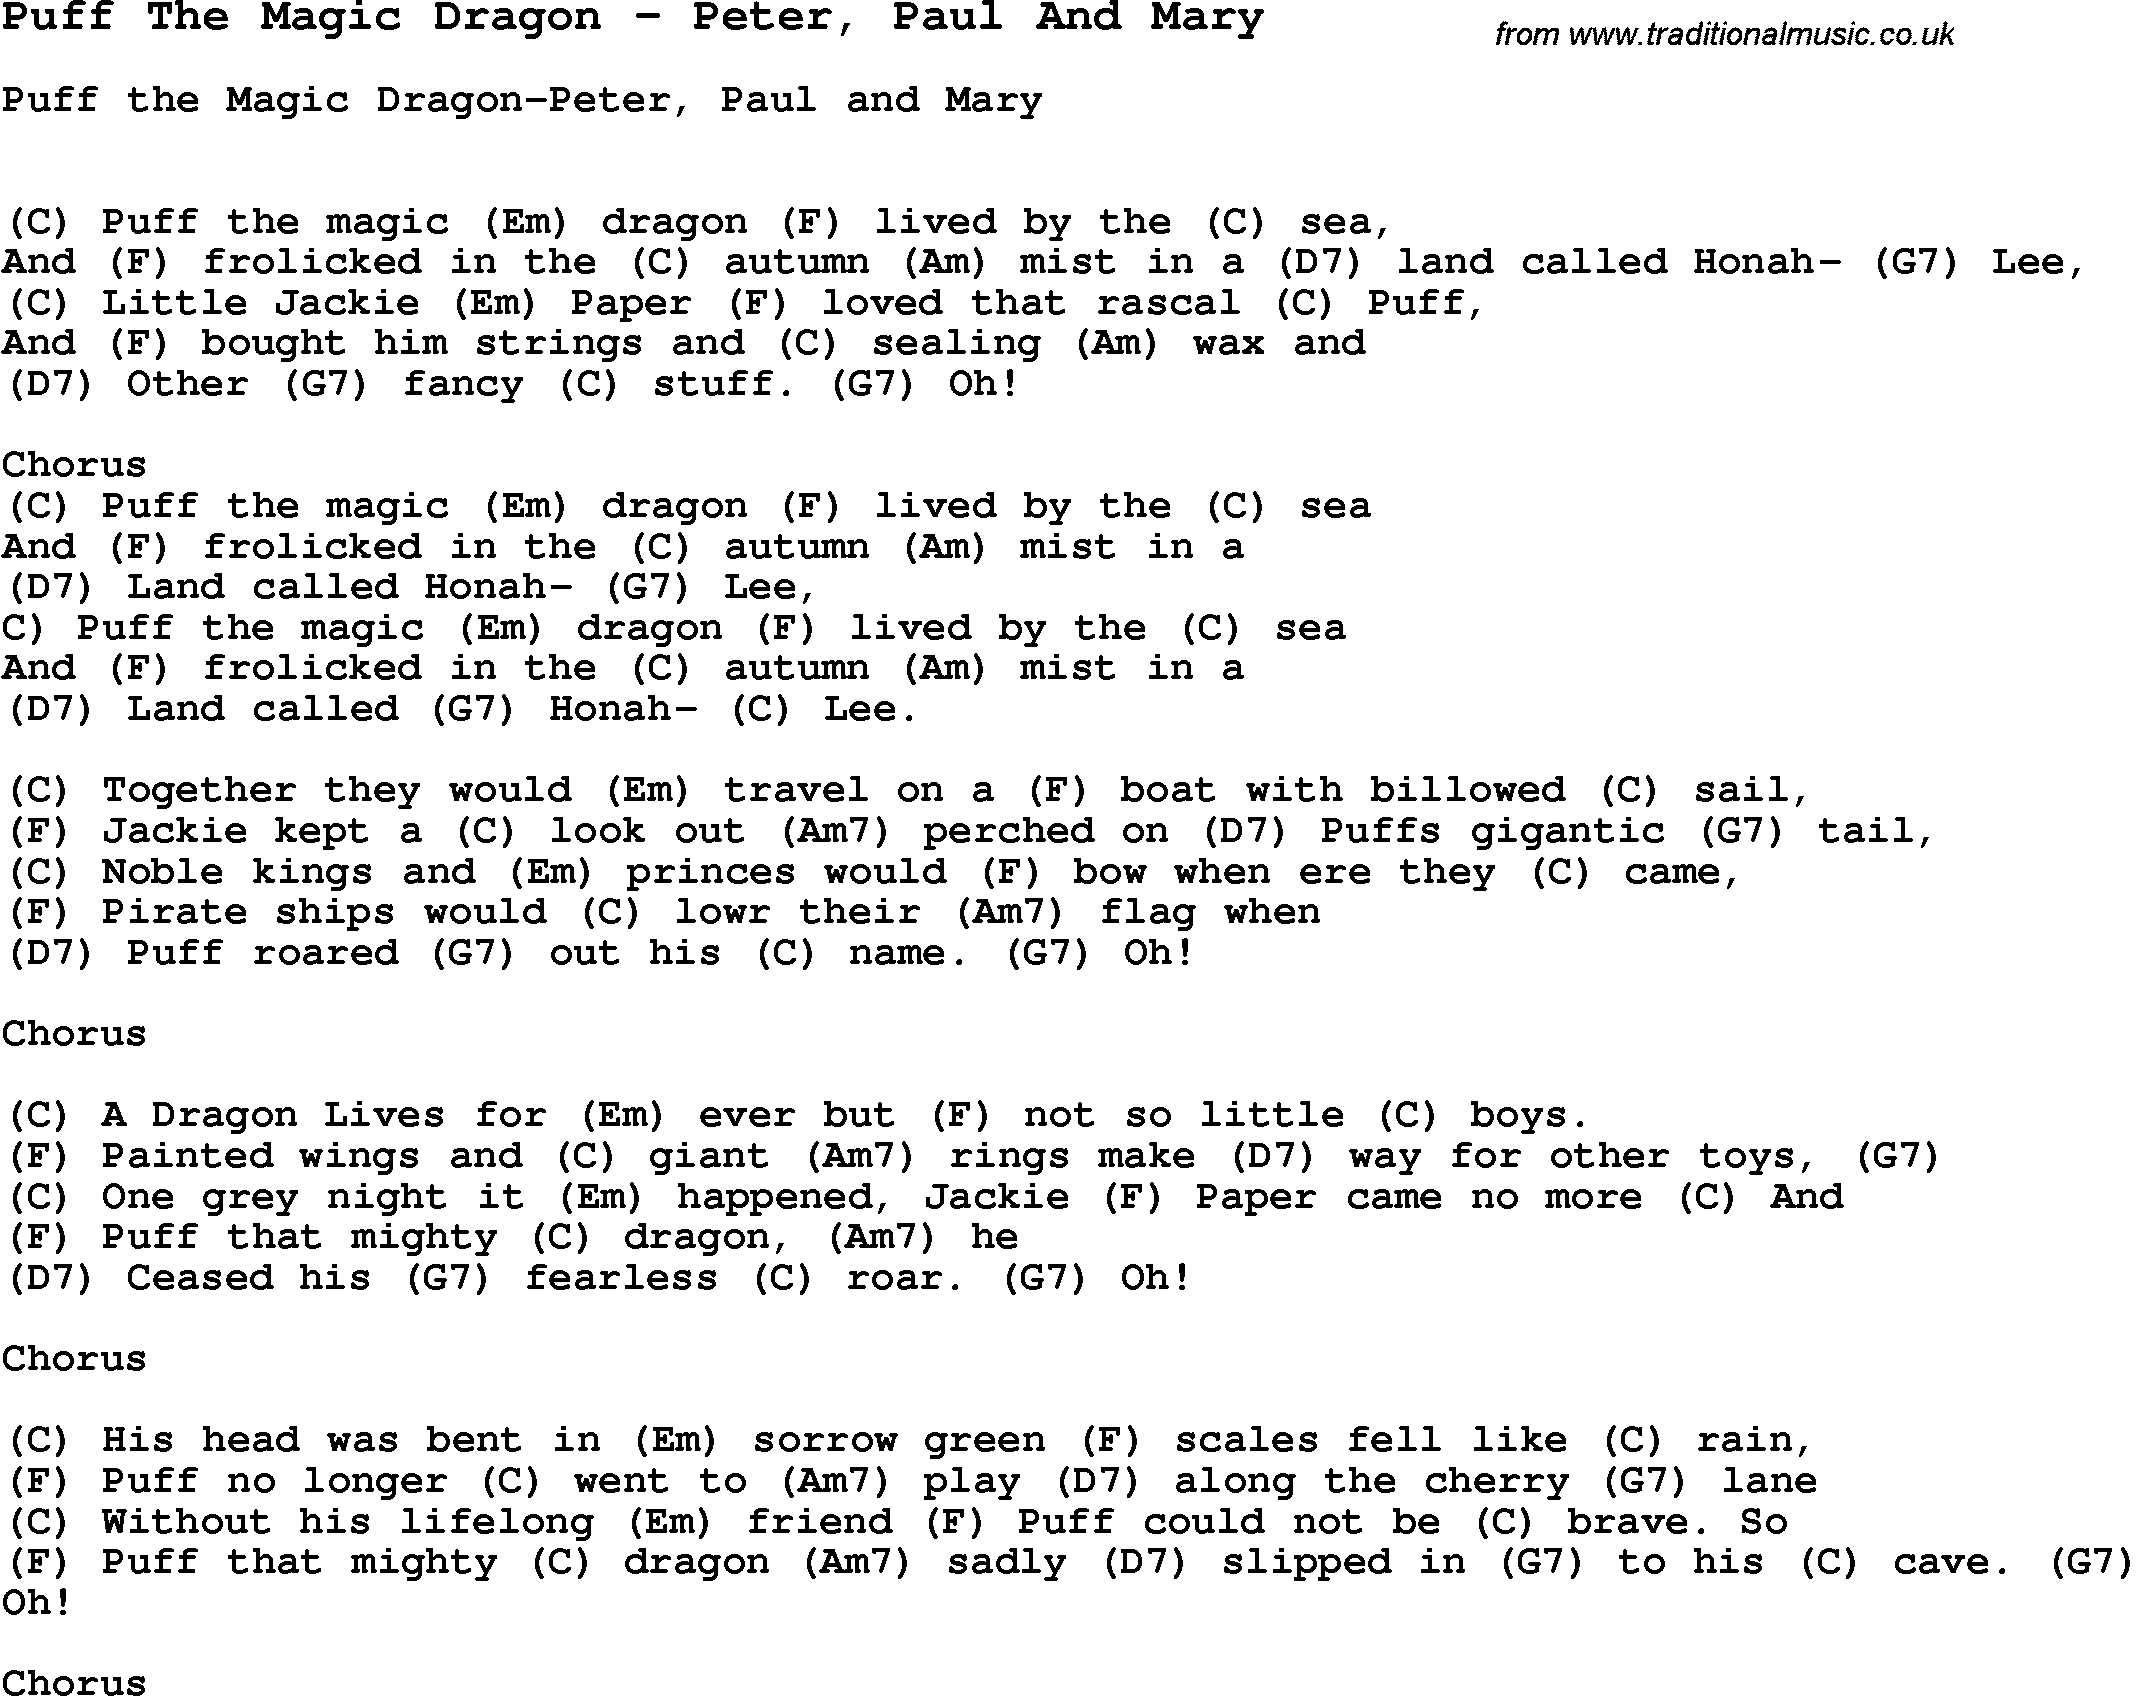 Song Puff The Magic Dragon by Peter, Paul And Mary, with lyrics for vocal performance and accompaniment chords for Ukulele, Guitar Banjo etc.